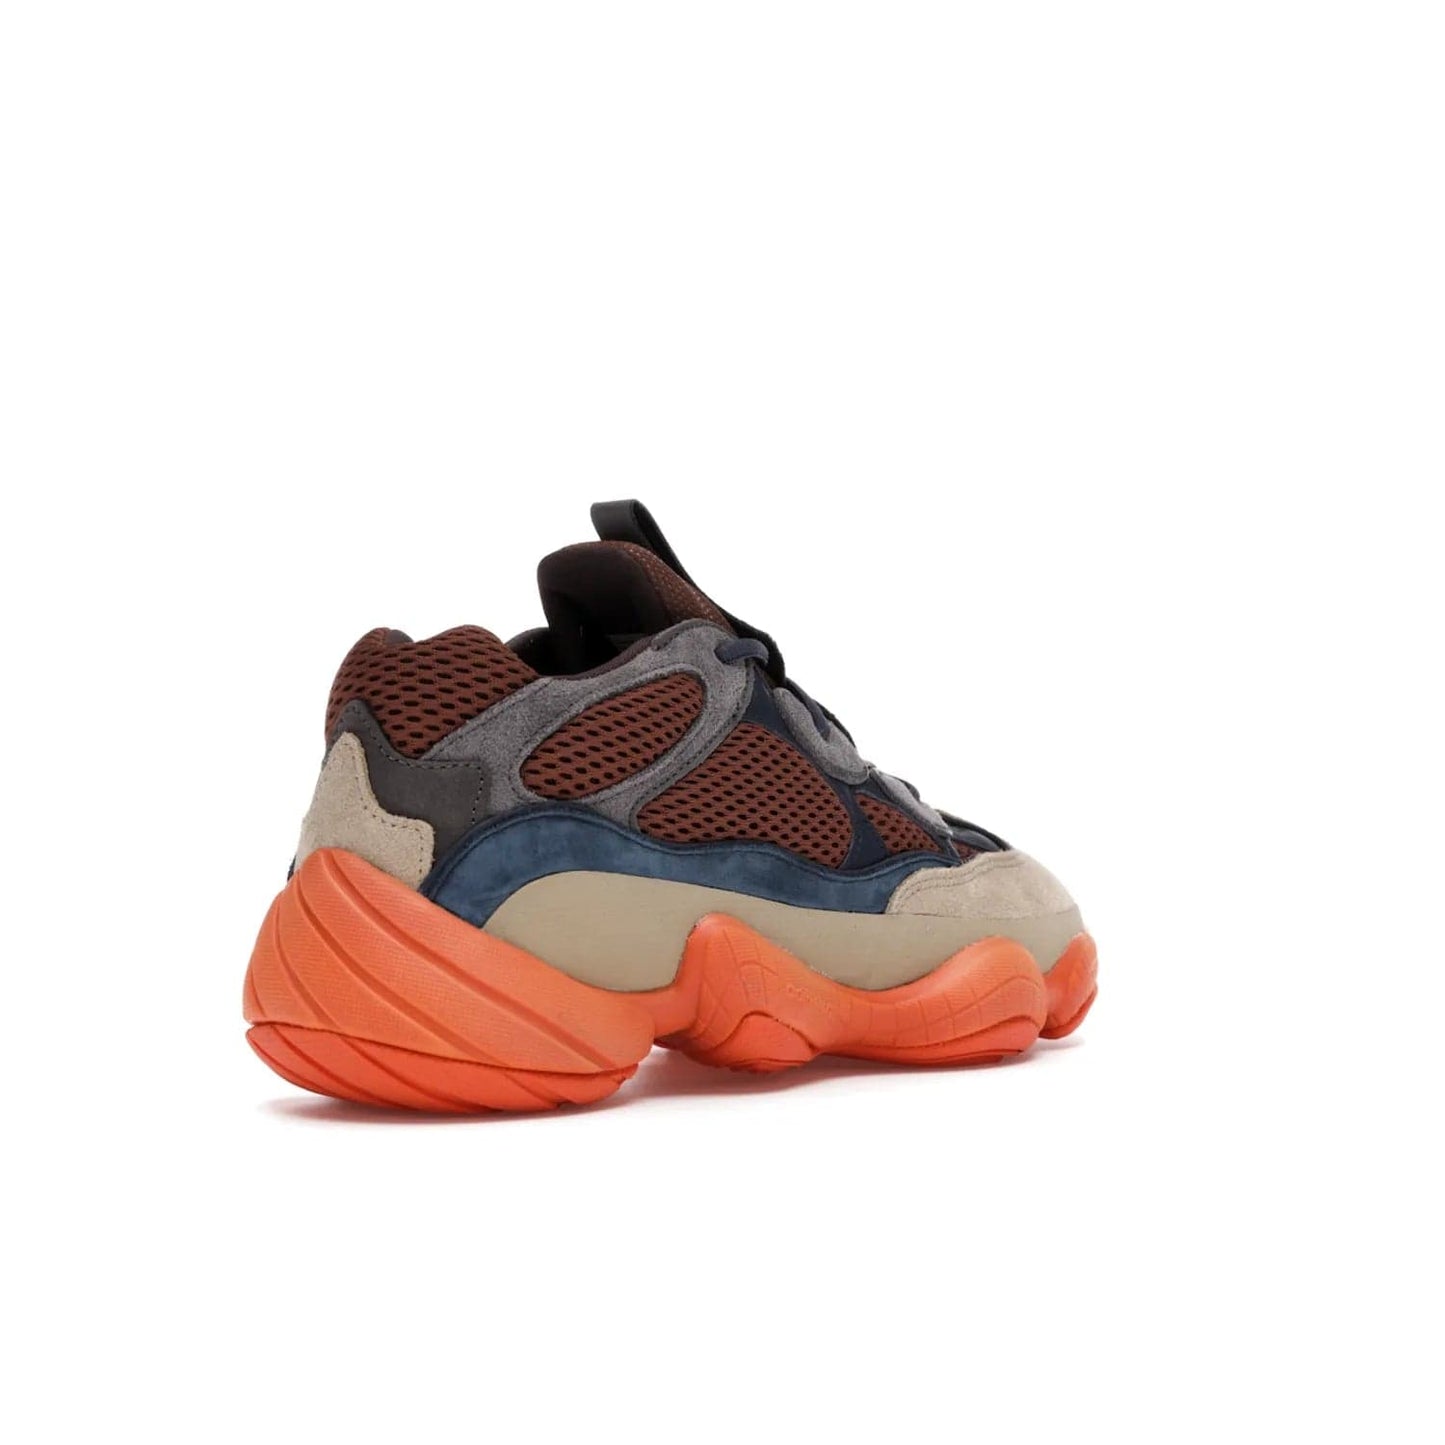 adidas Yeezy 500 Enflame - Image 32 - Only at www.BallersClubKickz.com - Step into style with the adidas Yeezy 500 Enflame. Mix of mesh, leather, and suede layered together to create tonal-brown, dark blue, & orange. Orange AdiPRENE sole provides superior cushioning & comfort. Get yours and experience maximum style.